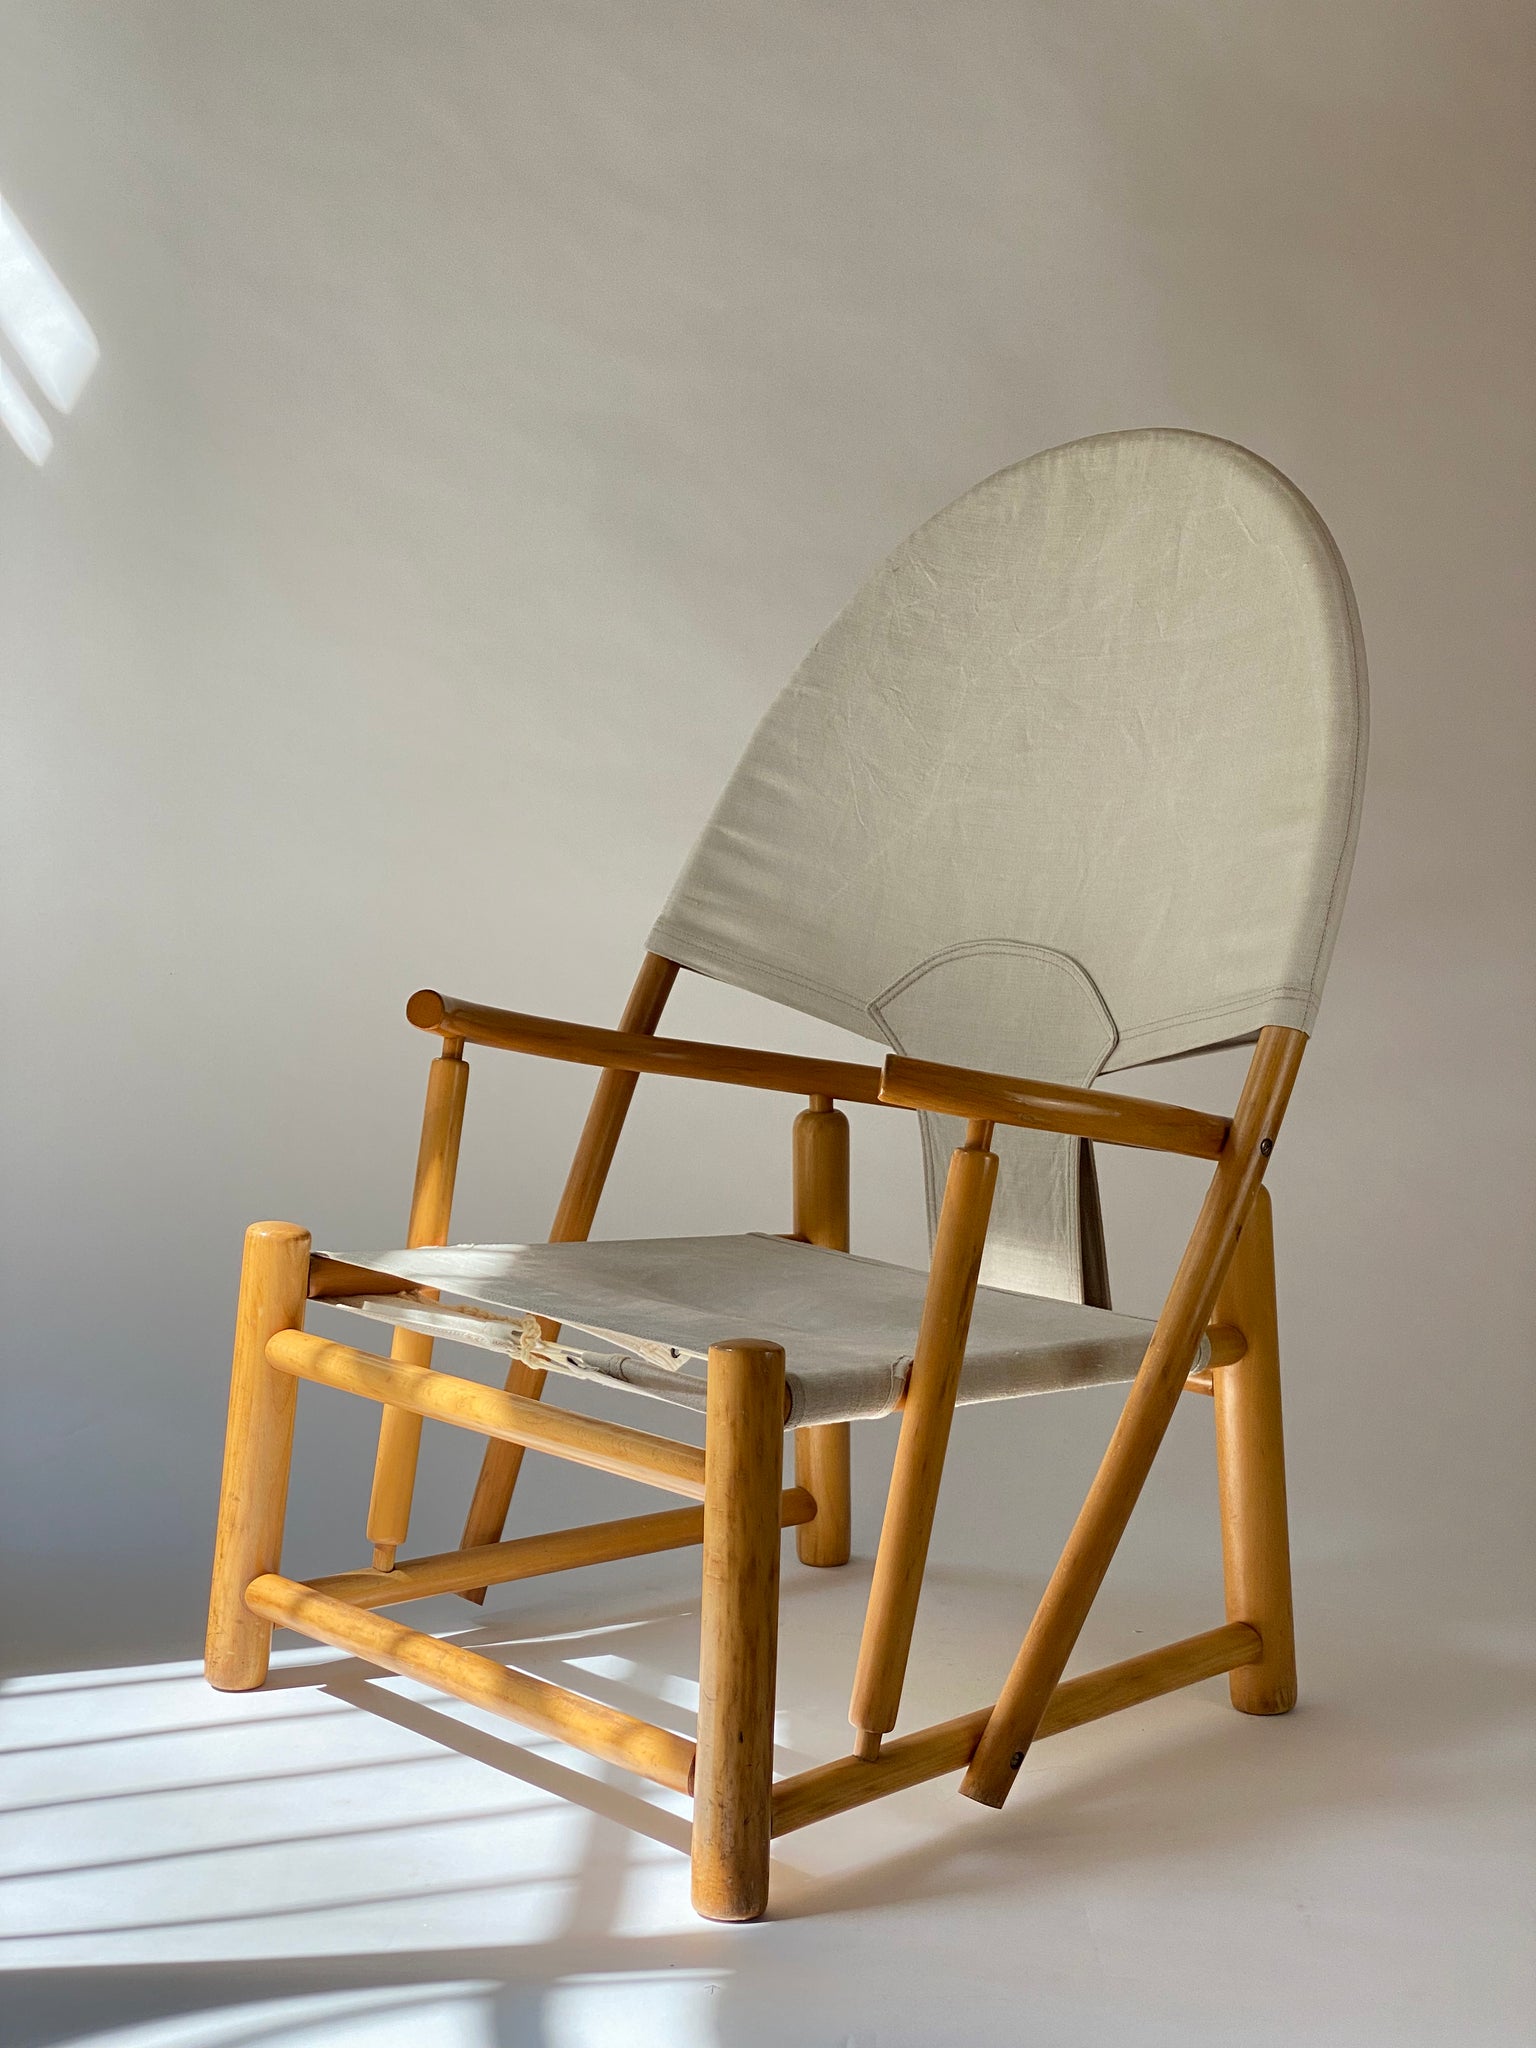 JUNE G23 Piero Hoop Werther for Toffoloni Palange Lounge ANOTHER Chair Germa, & by –